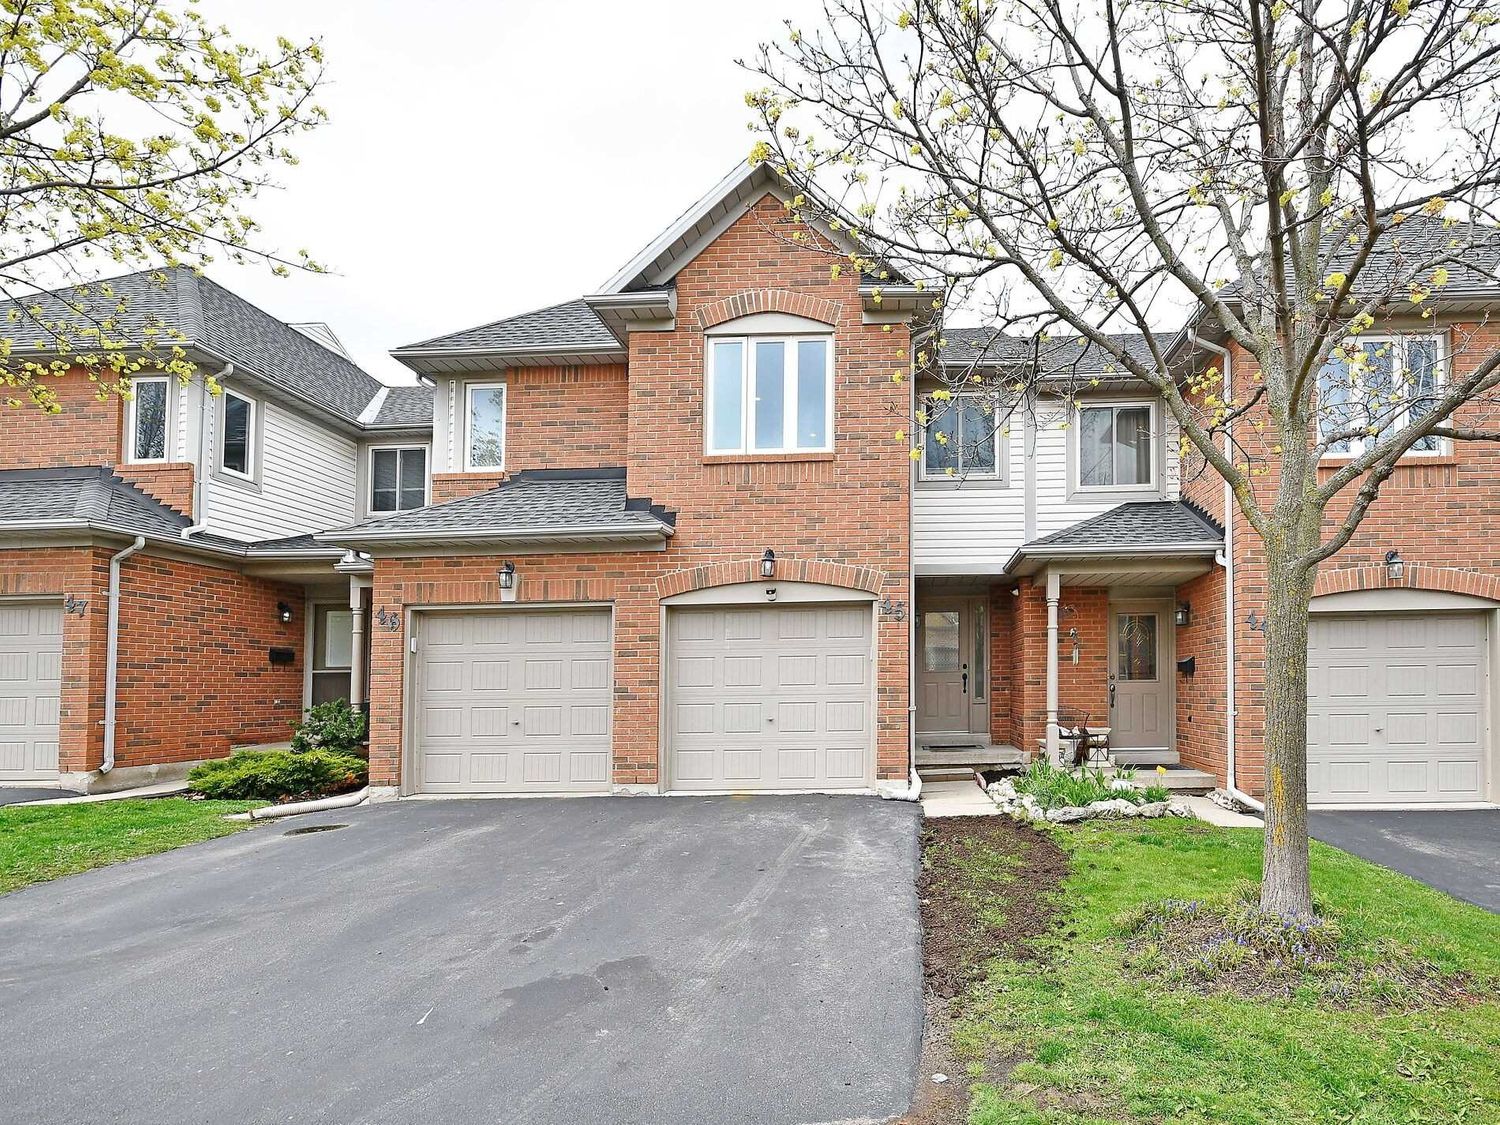 2920 Headon Forest Drive. 2920 Headon Forest Drive Townhomes is located in  Burlington, Toronto - image #2 of 2